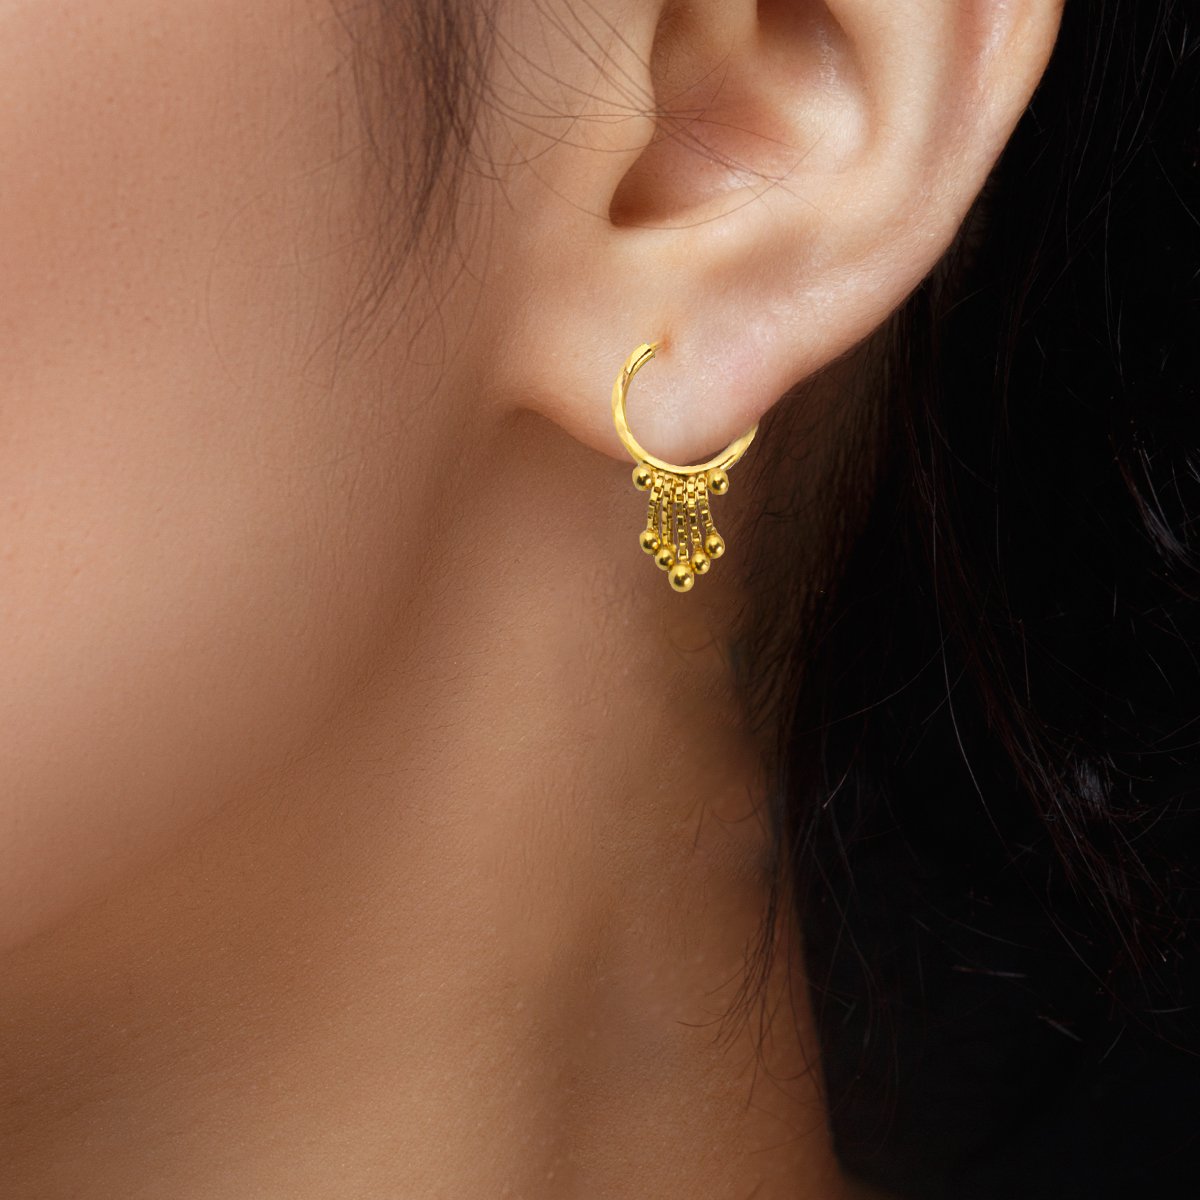 8 Ball Gold Earrings With Free and Fast Shipping - Pearlkraft